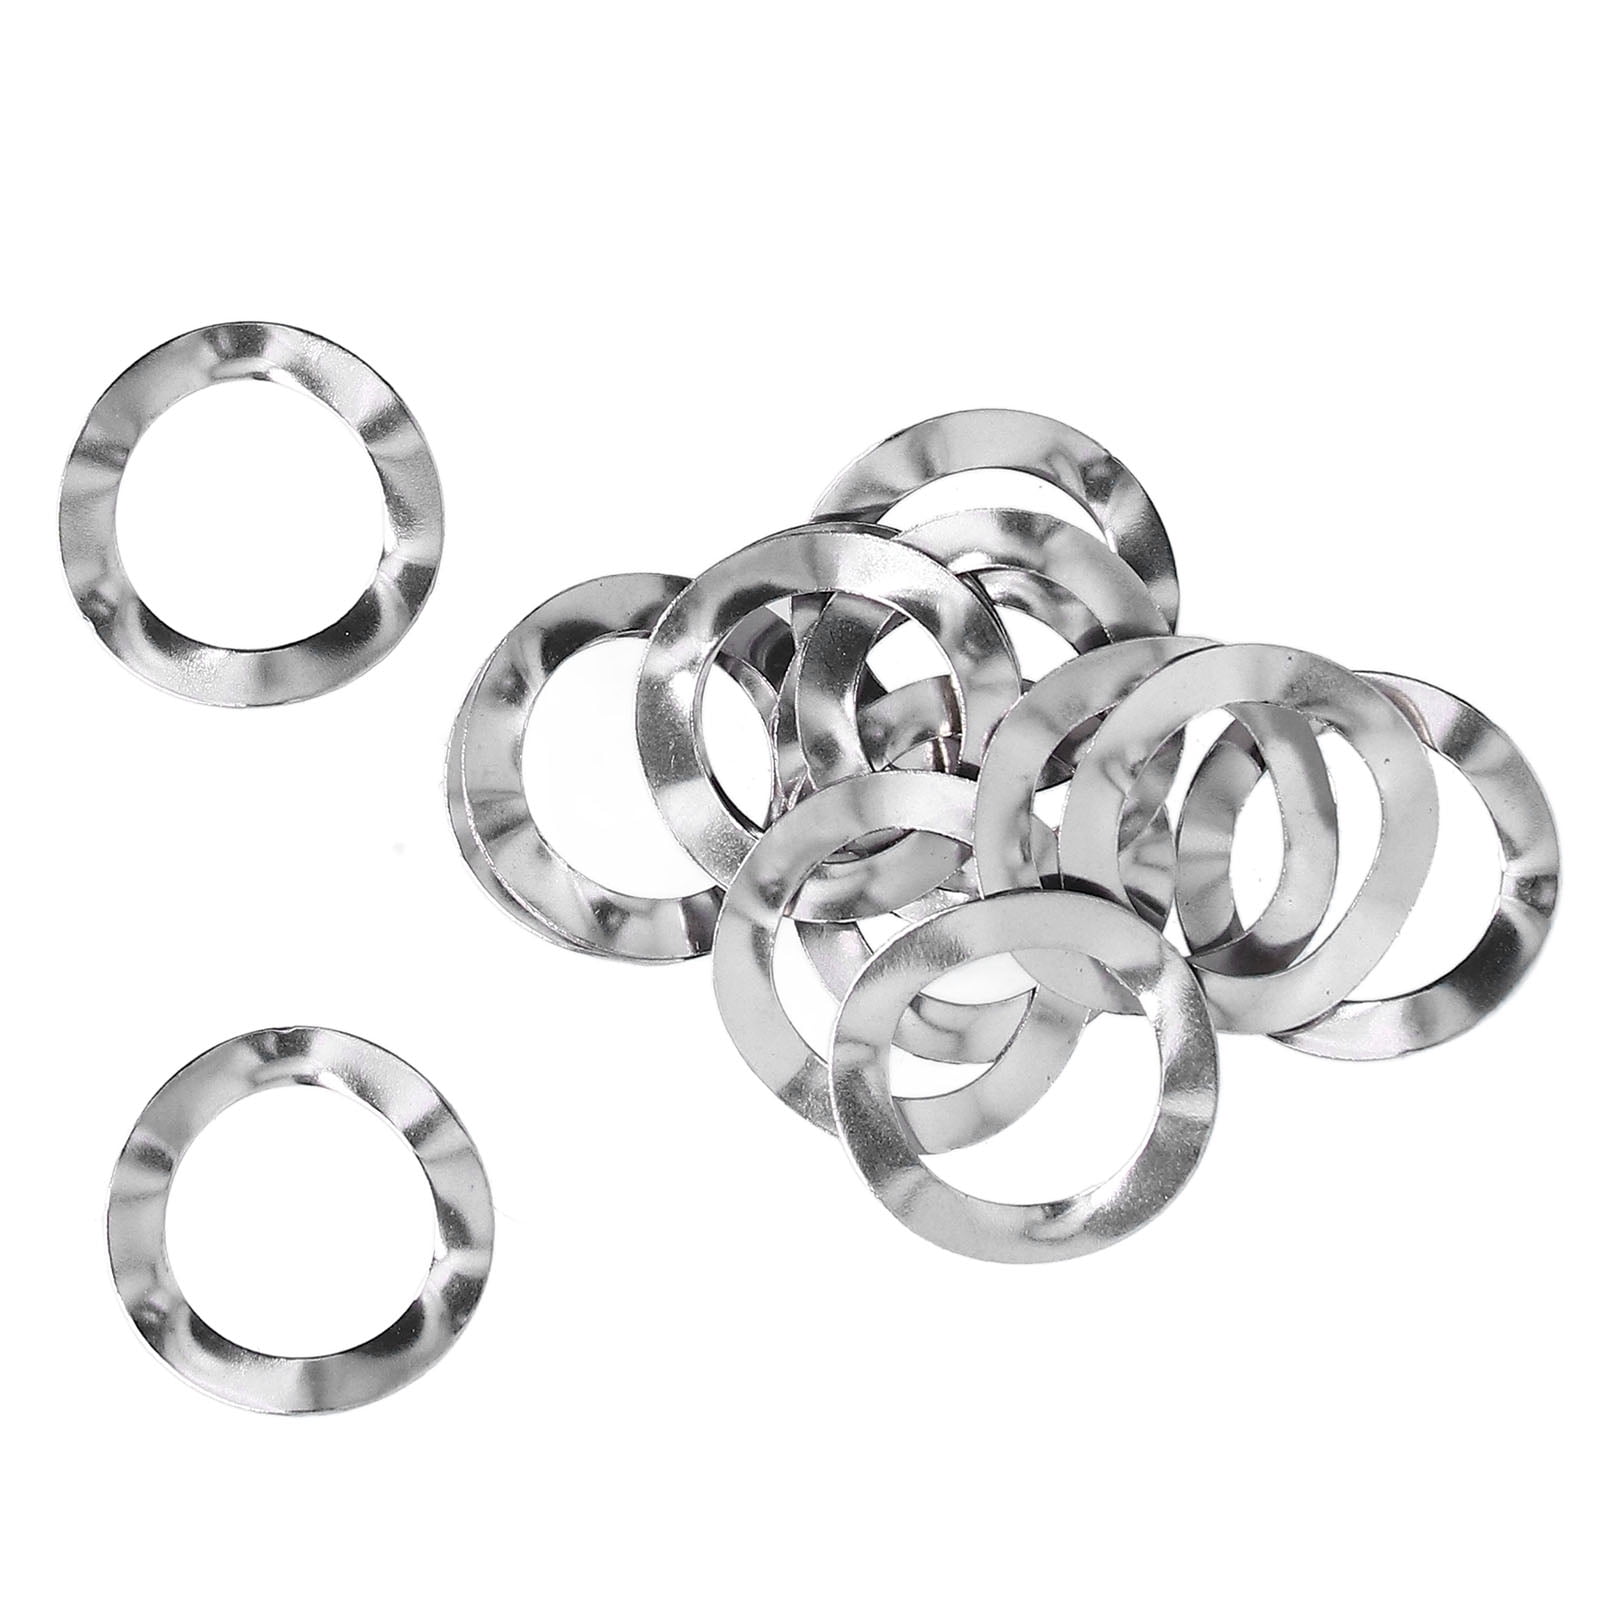 WAVEY WASHERS CRINKLE WAVE METRIC M3,M4,M5,M6,M8,M10,M12 A2 STAINLESS STEEL 